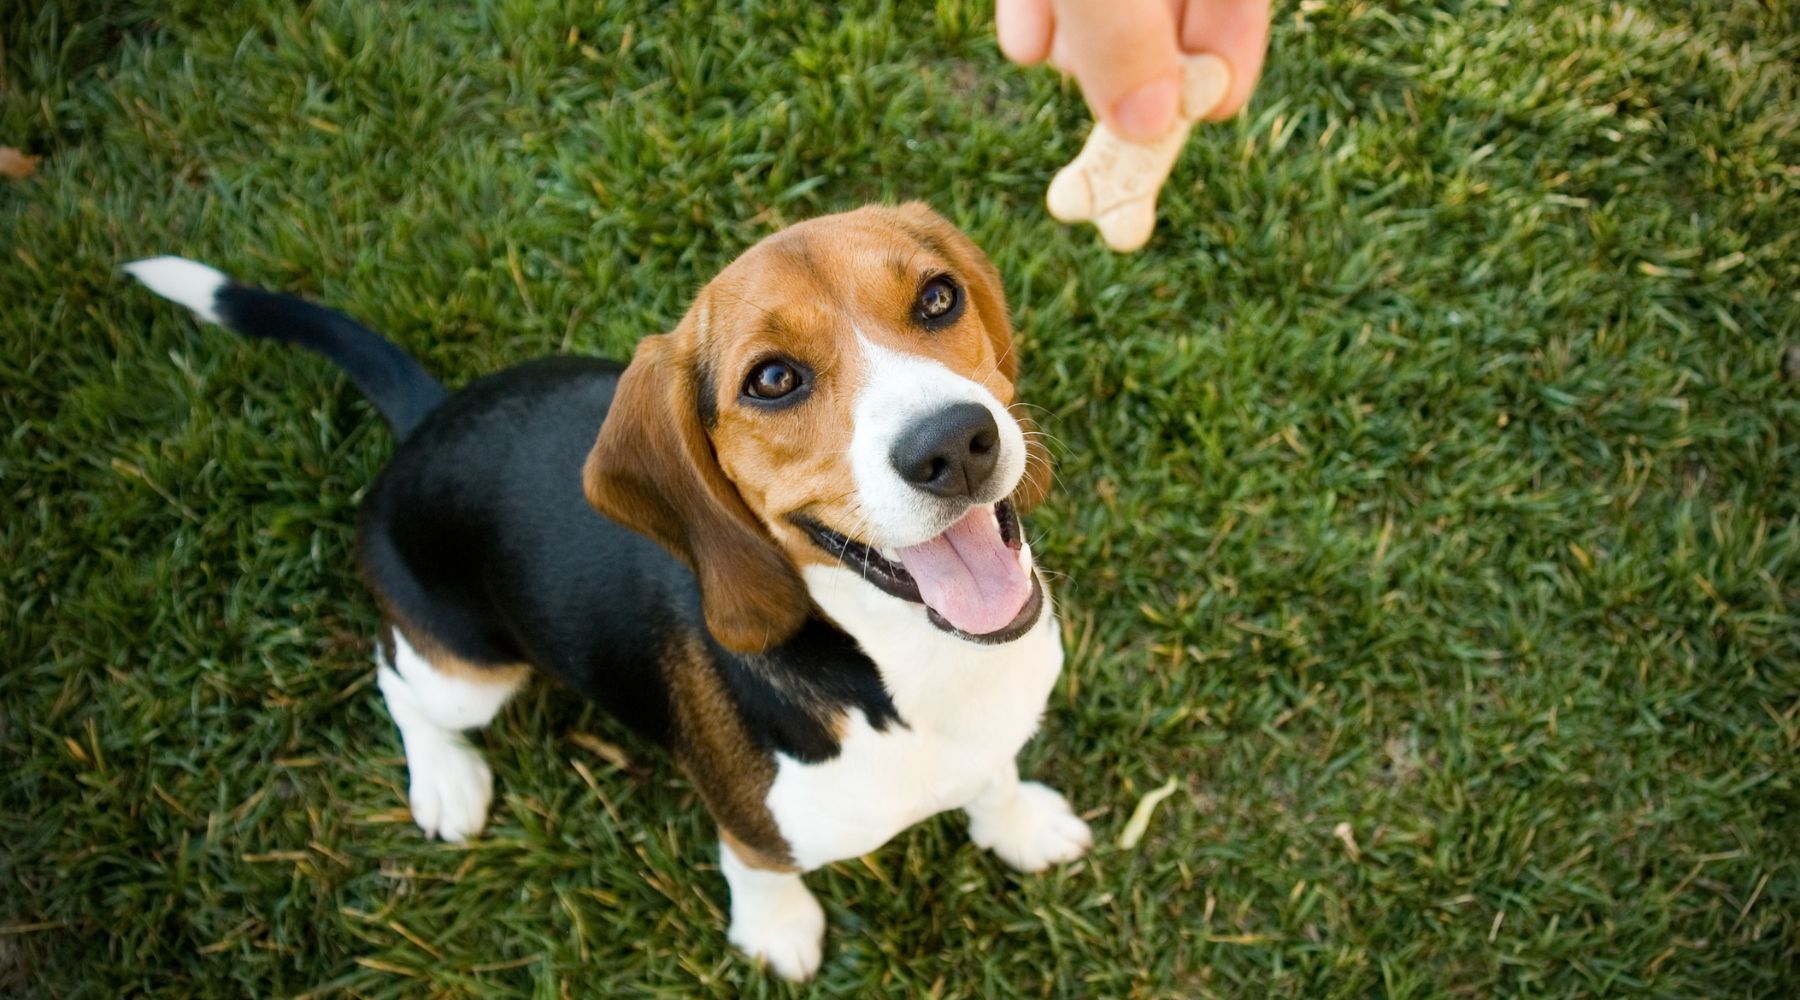 Teaching a dog to sit using a treat